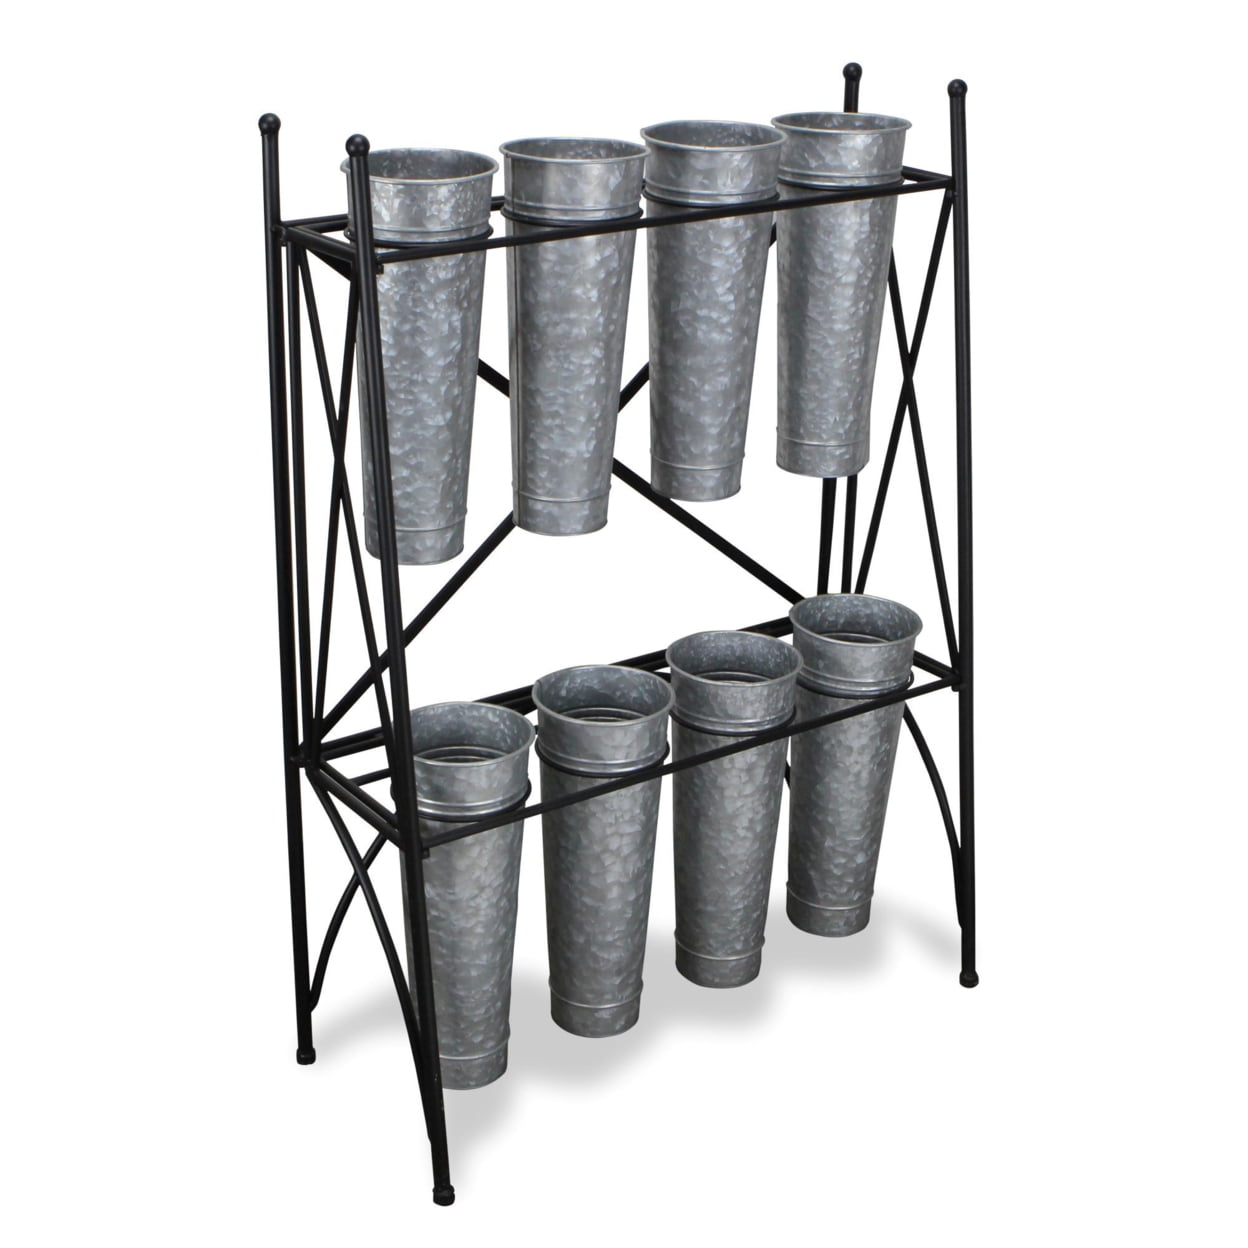 Picture of Cheungs 5201 8 Pot Plant Stand with Galvanized Pots